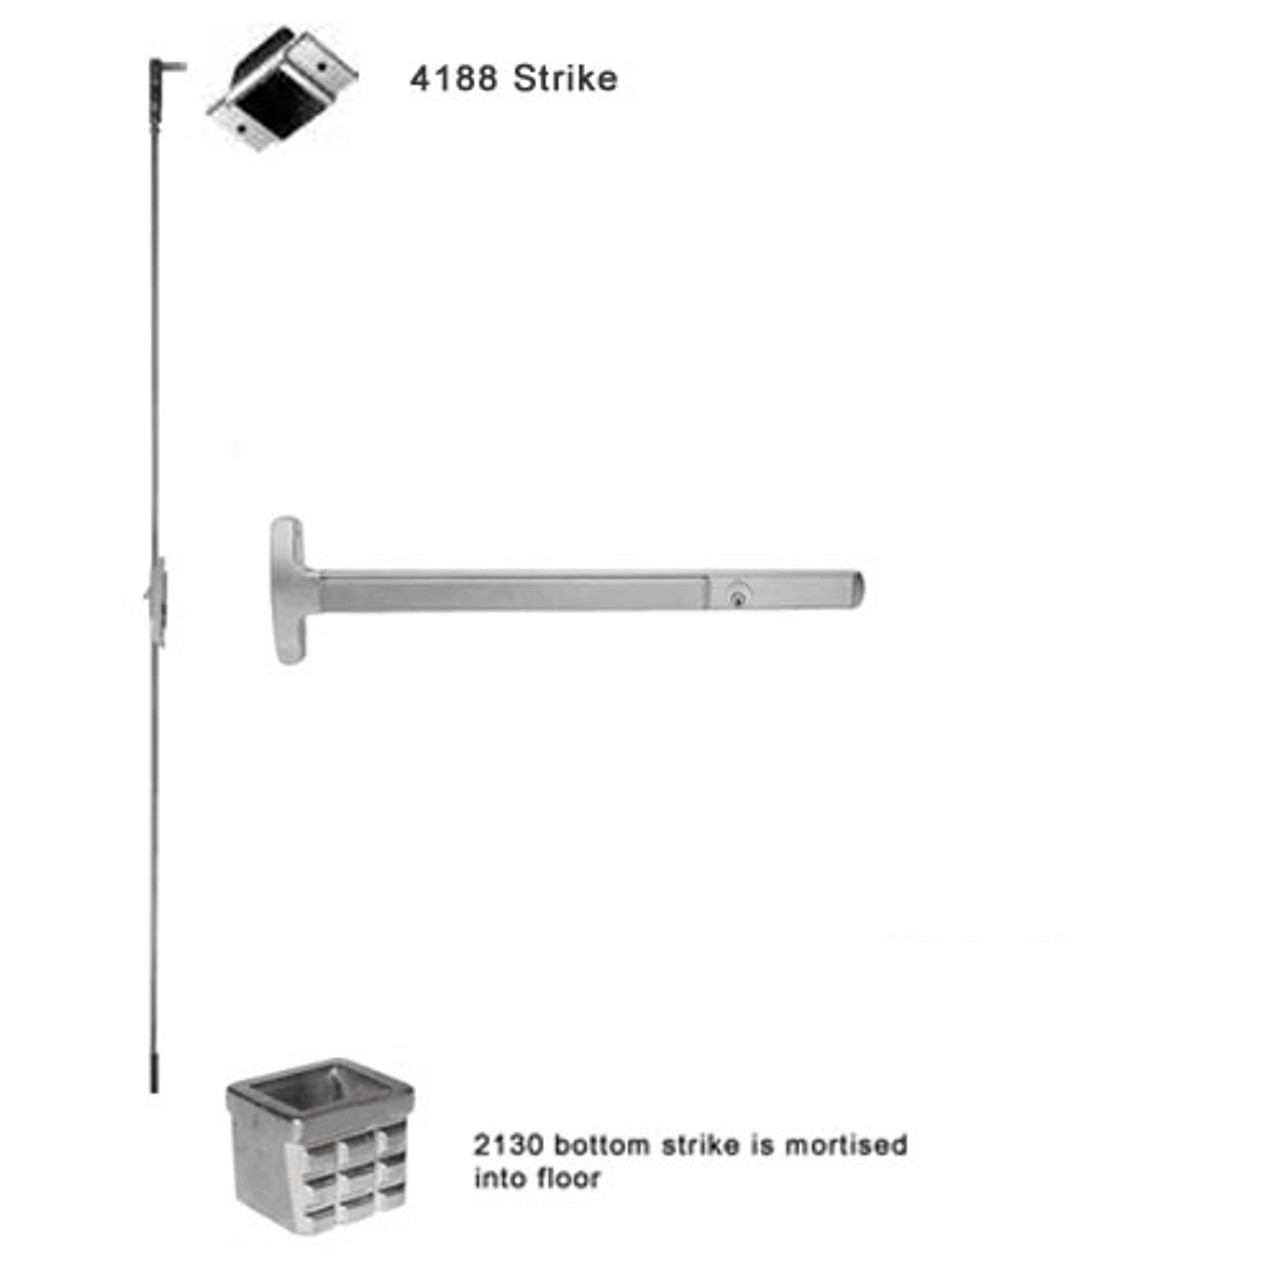 CD24-C-L-BE-DANE-US15-2-RHR Falcon 24 Series Concealed Vertical Rod Device 712L-BE Dane Lever Trim with Blank Escutcheon in Satin Nickel